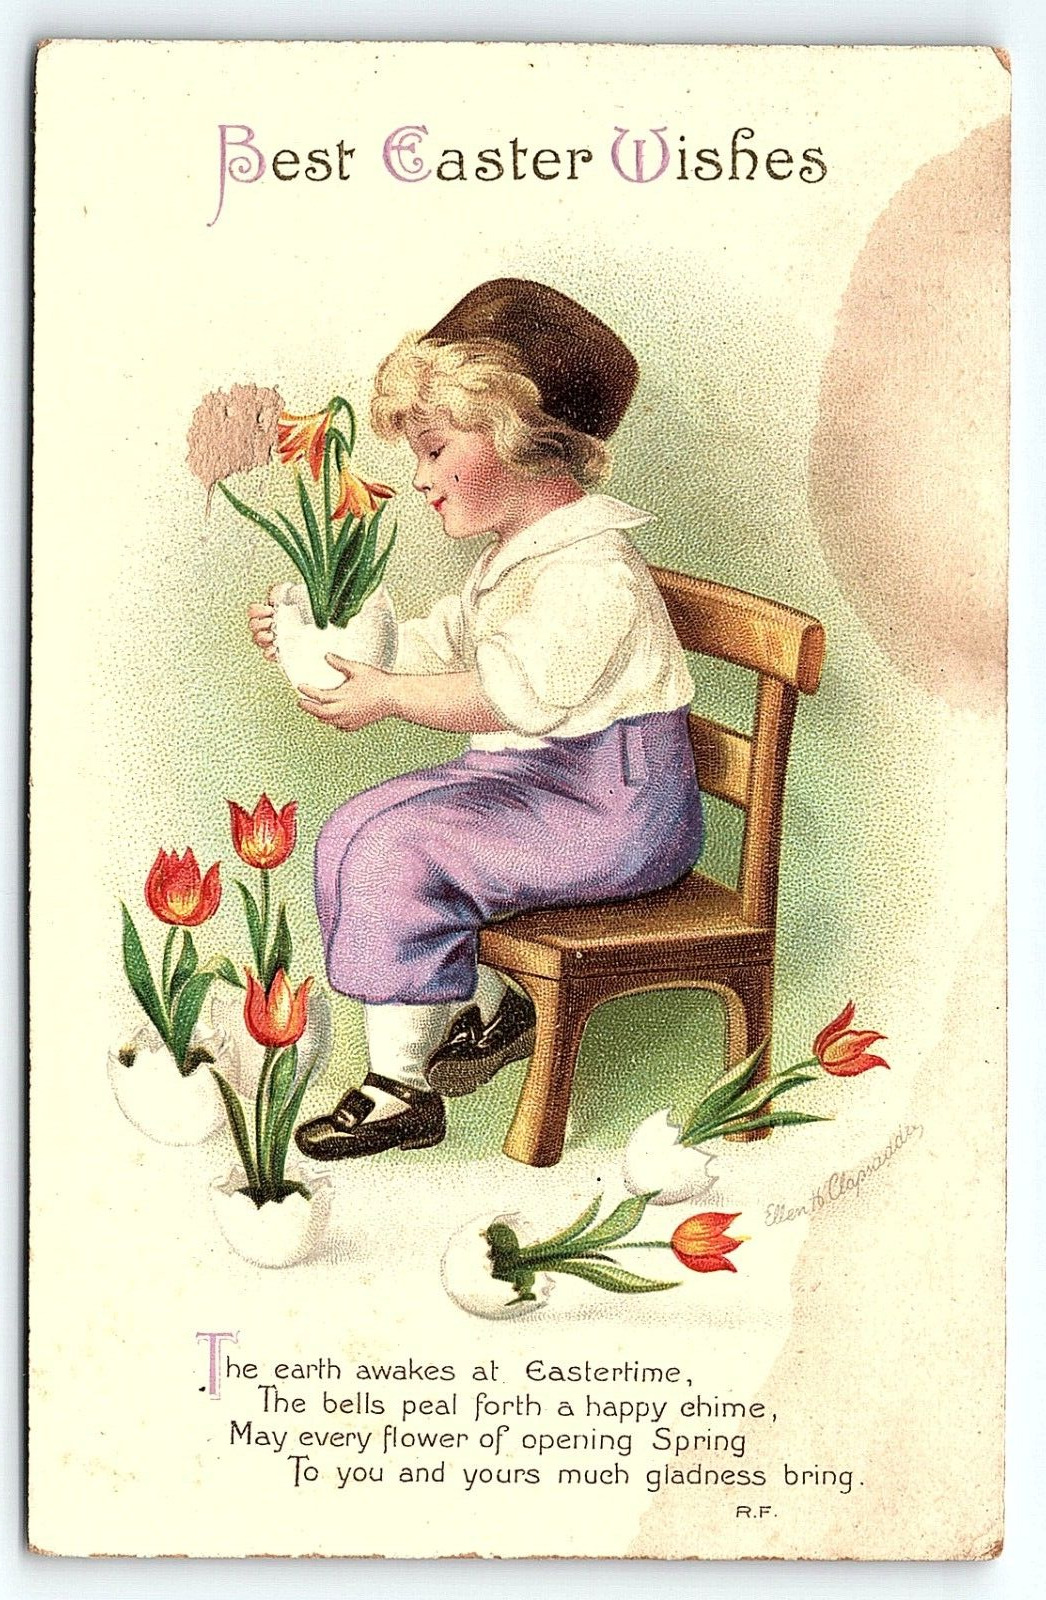 c1920 BEST EASTER WISHES ELLEN H CLAPSADDLE GIRL WITH TULIPS POSTCARD P2497